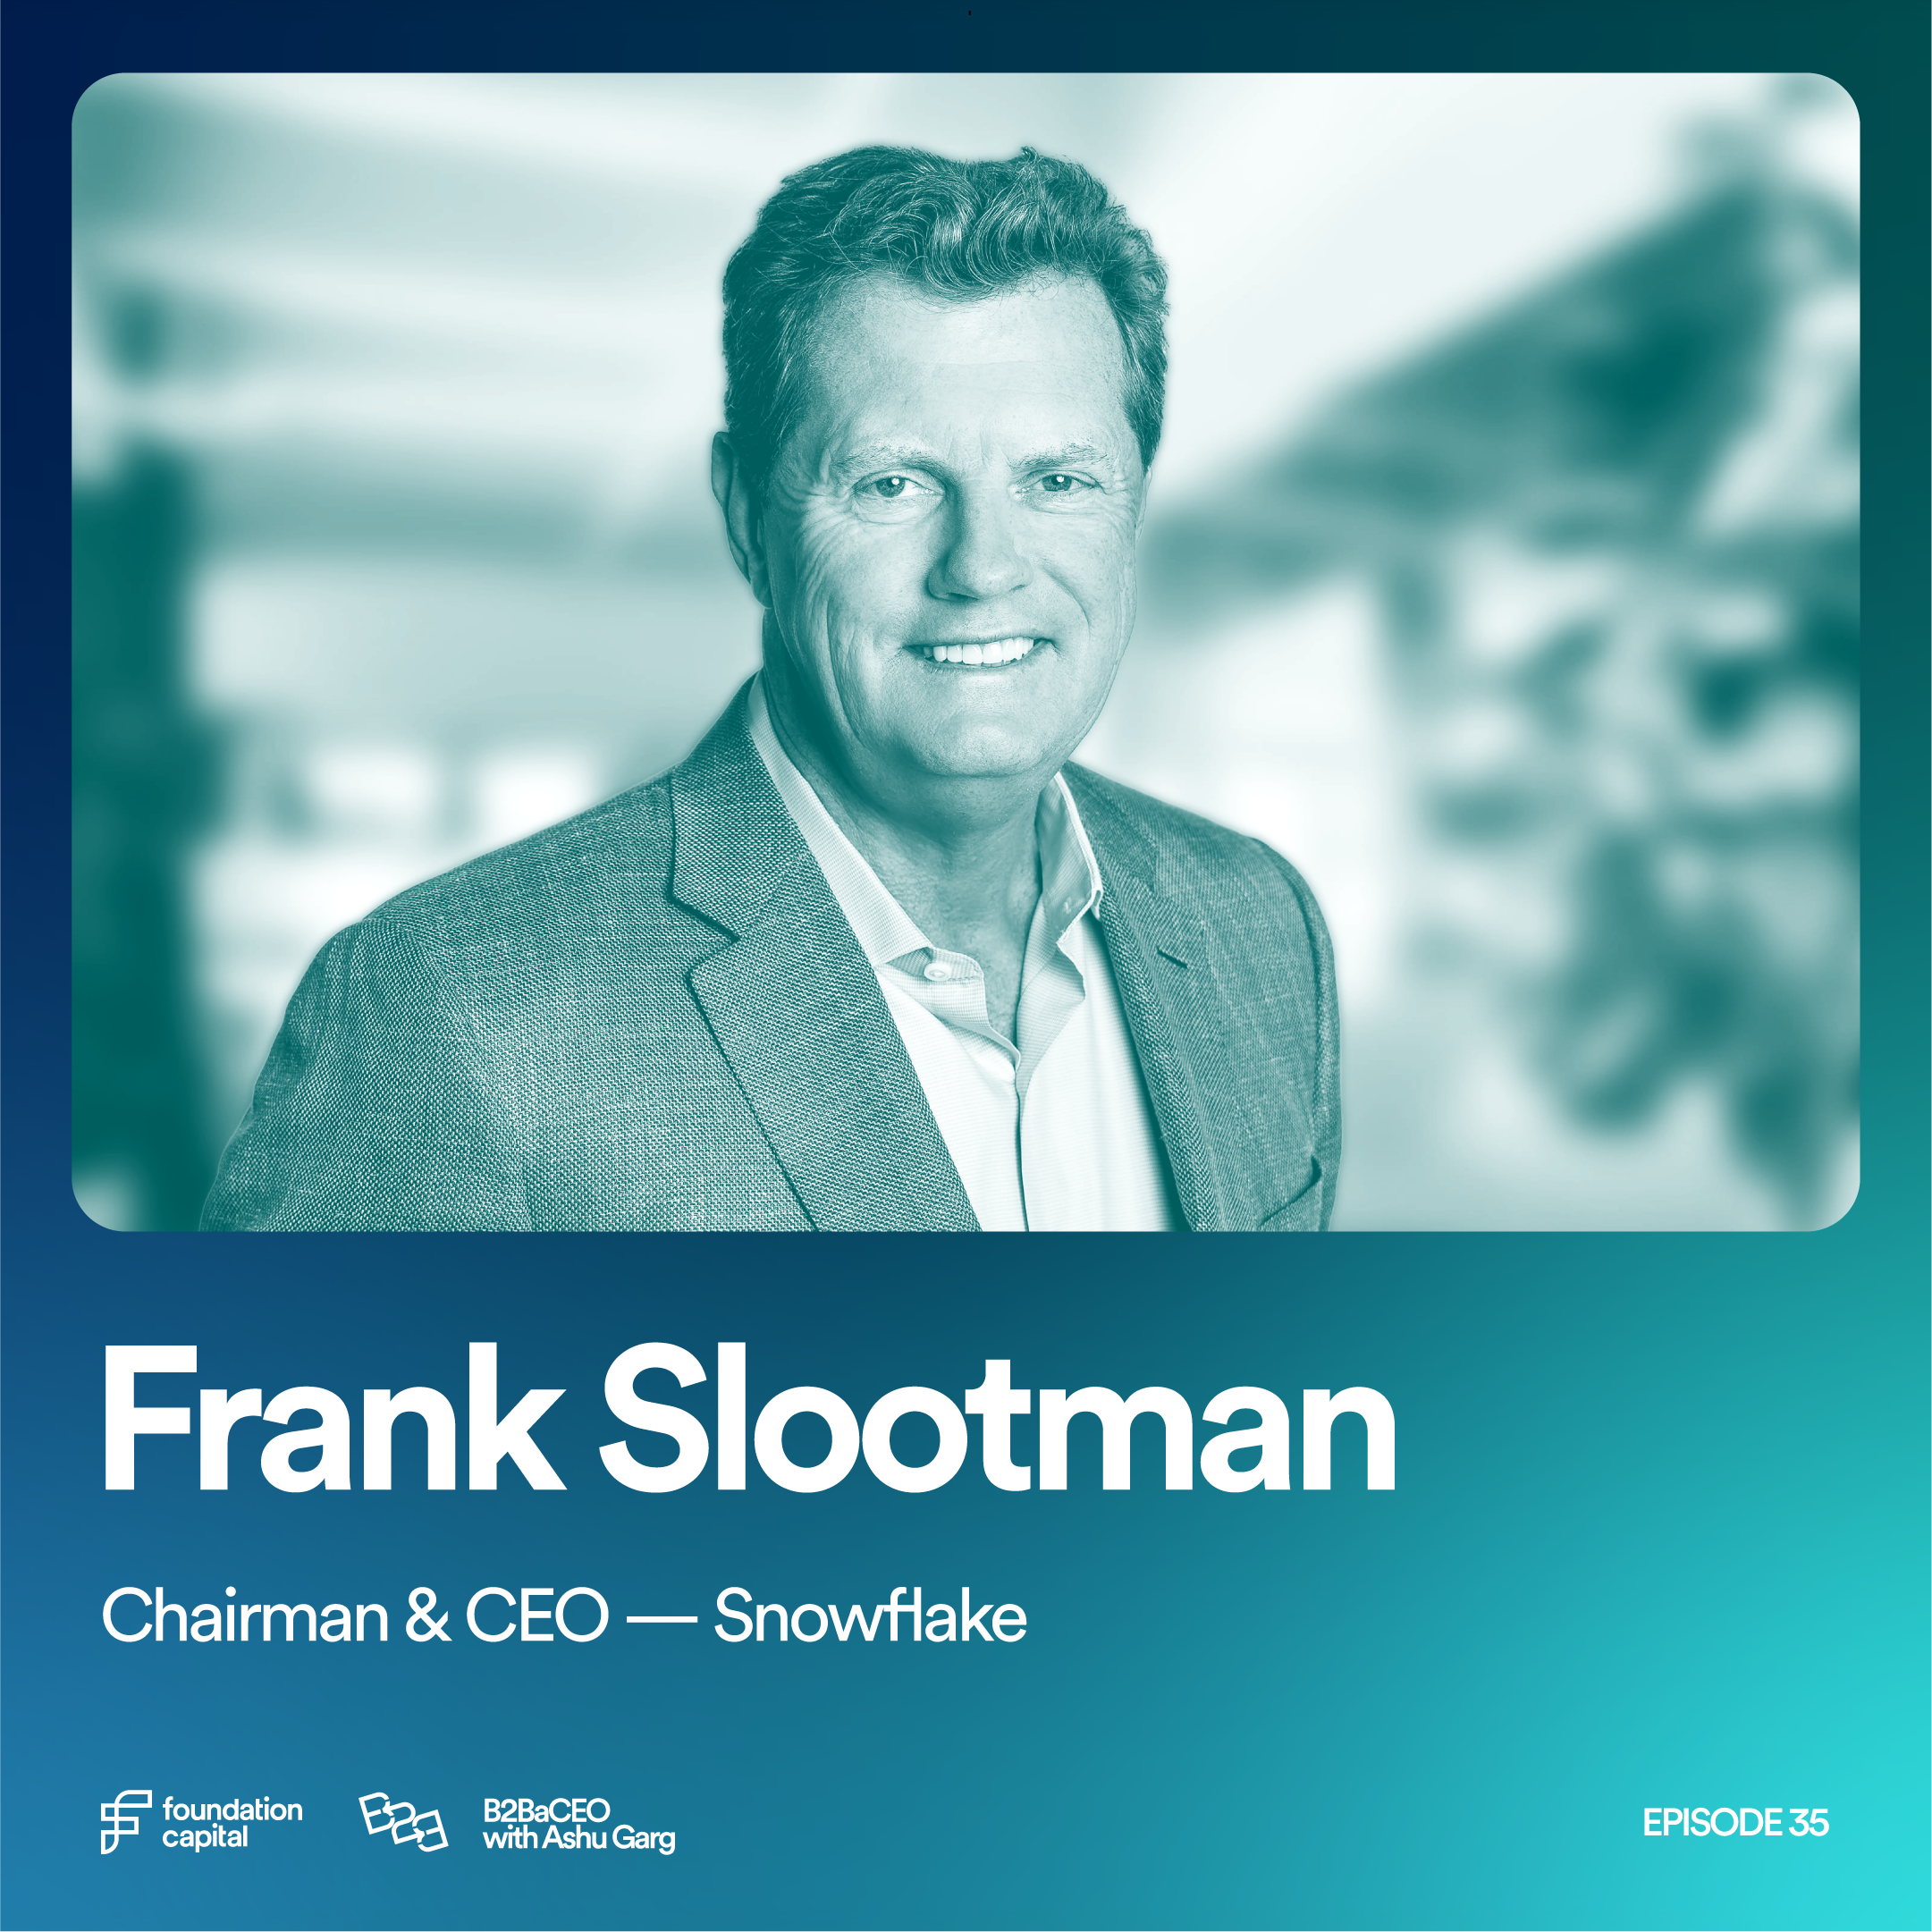 Frank Slootman, Chairman and CEO of Snowflake